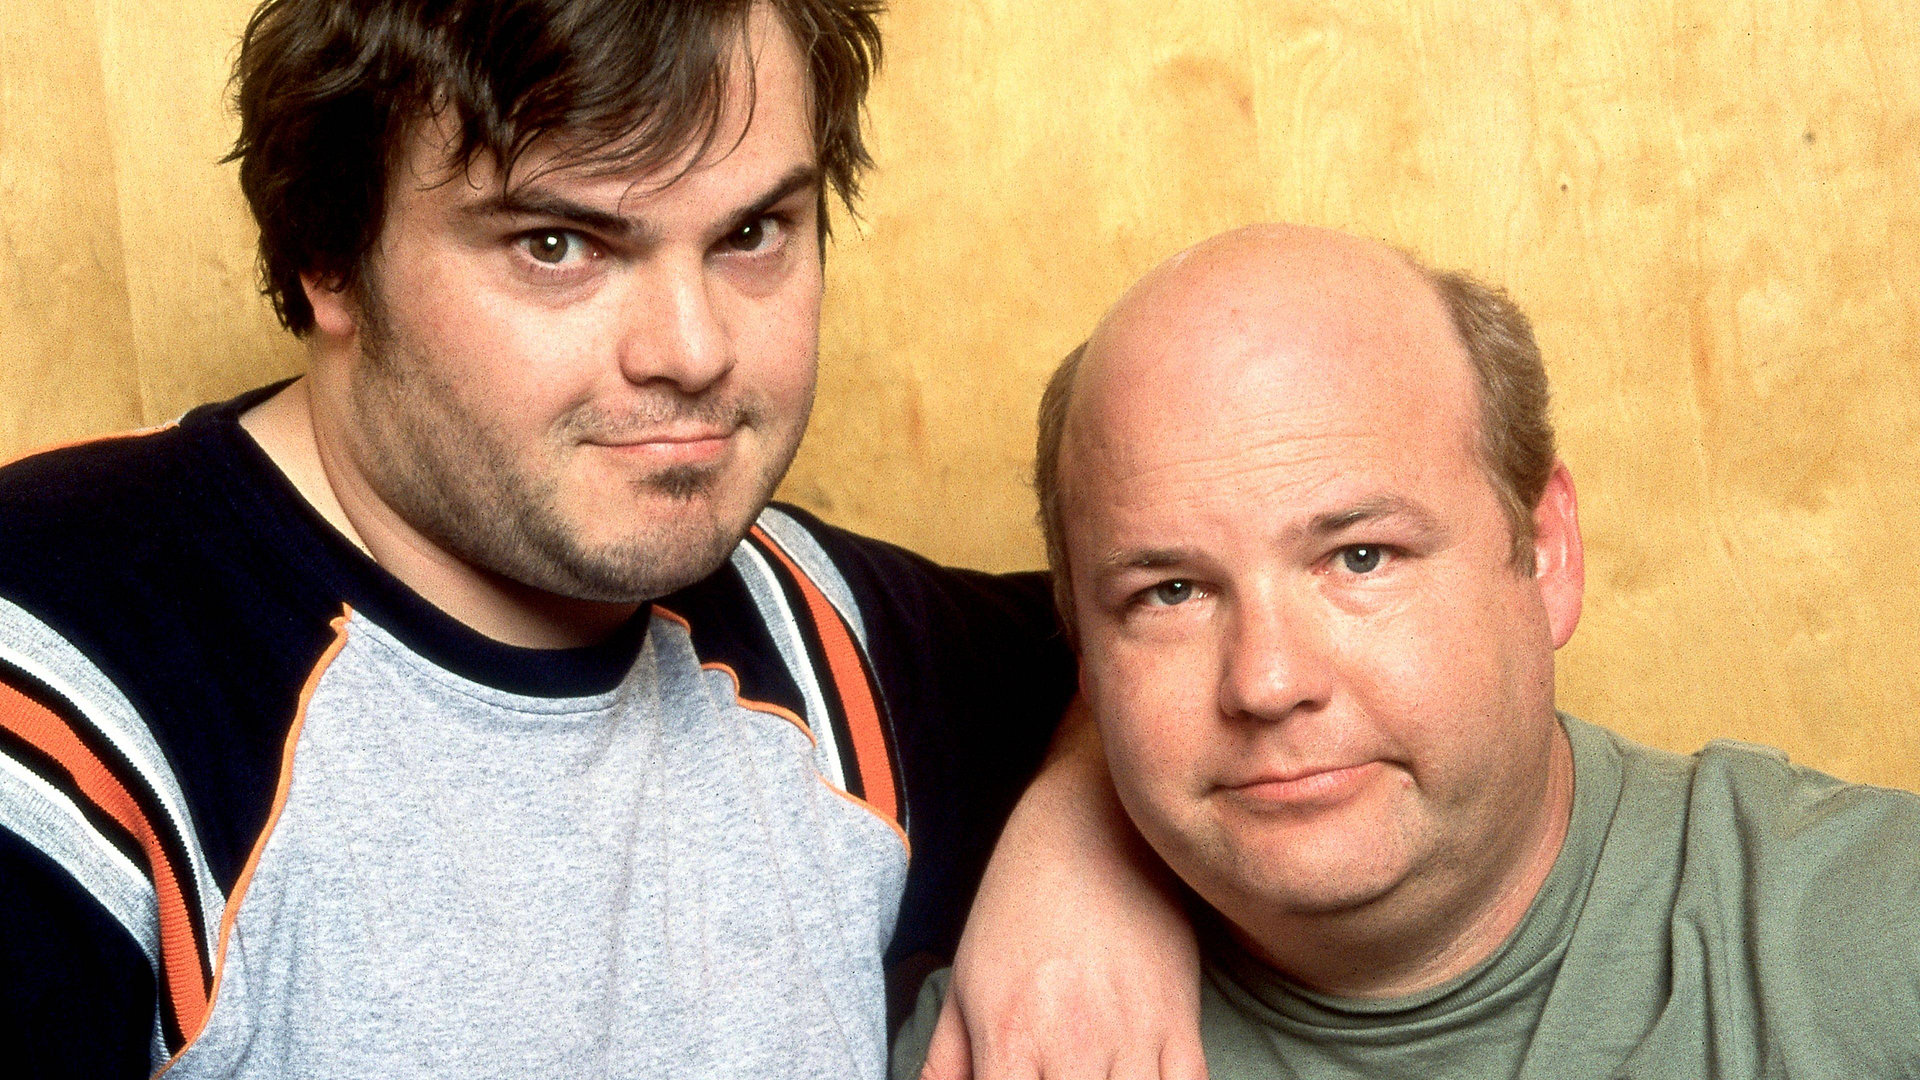 Tenacious D 02: Death of a Dream / The Greatest Song in the World